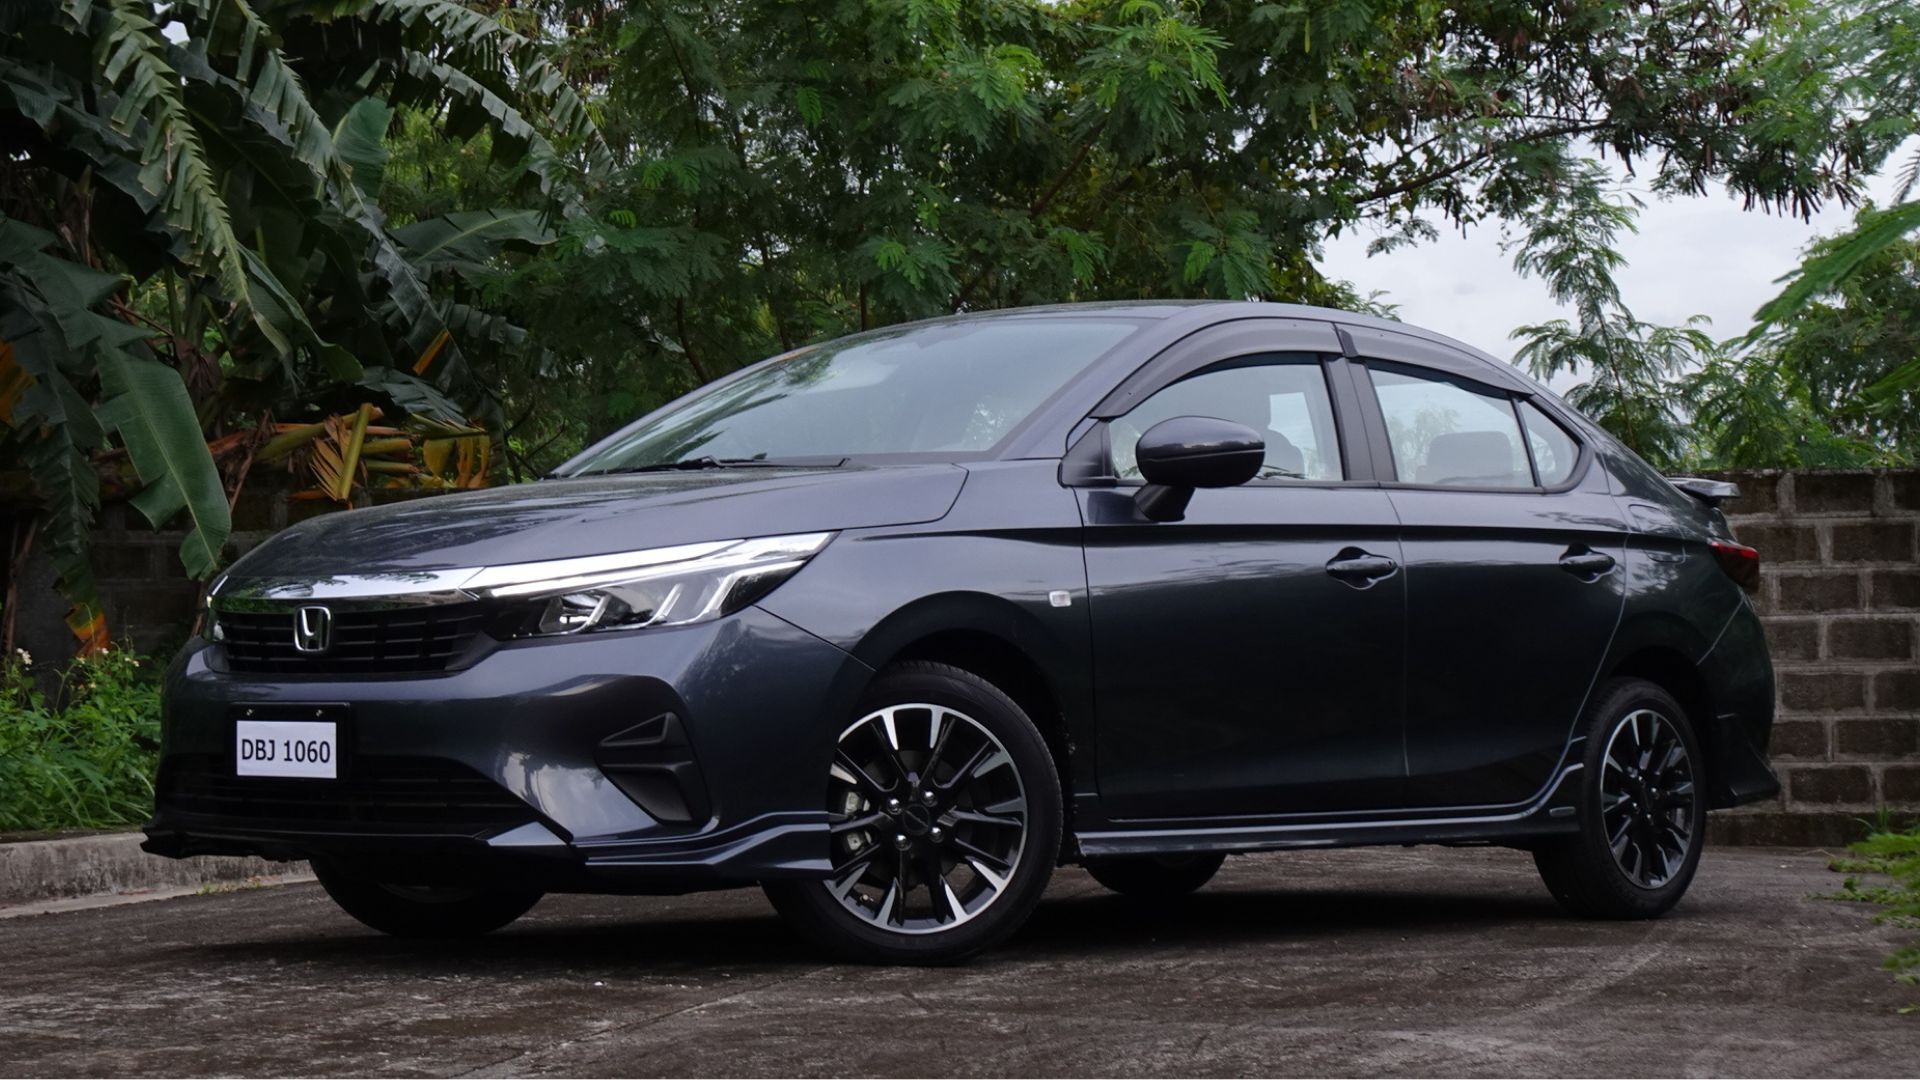 Honda City S CVT review in the Philippines